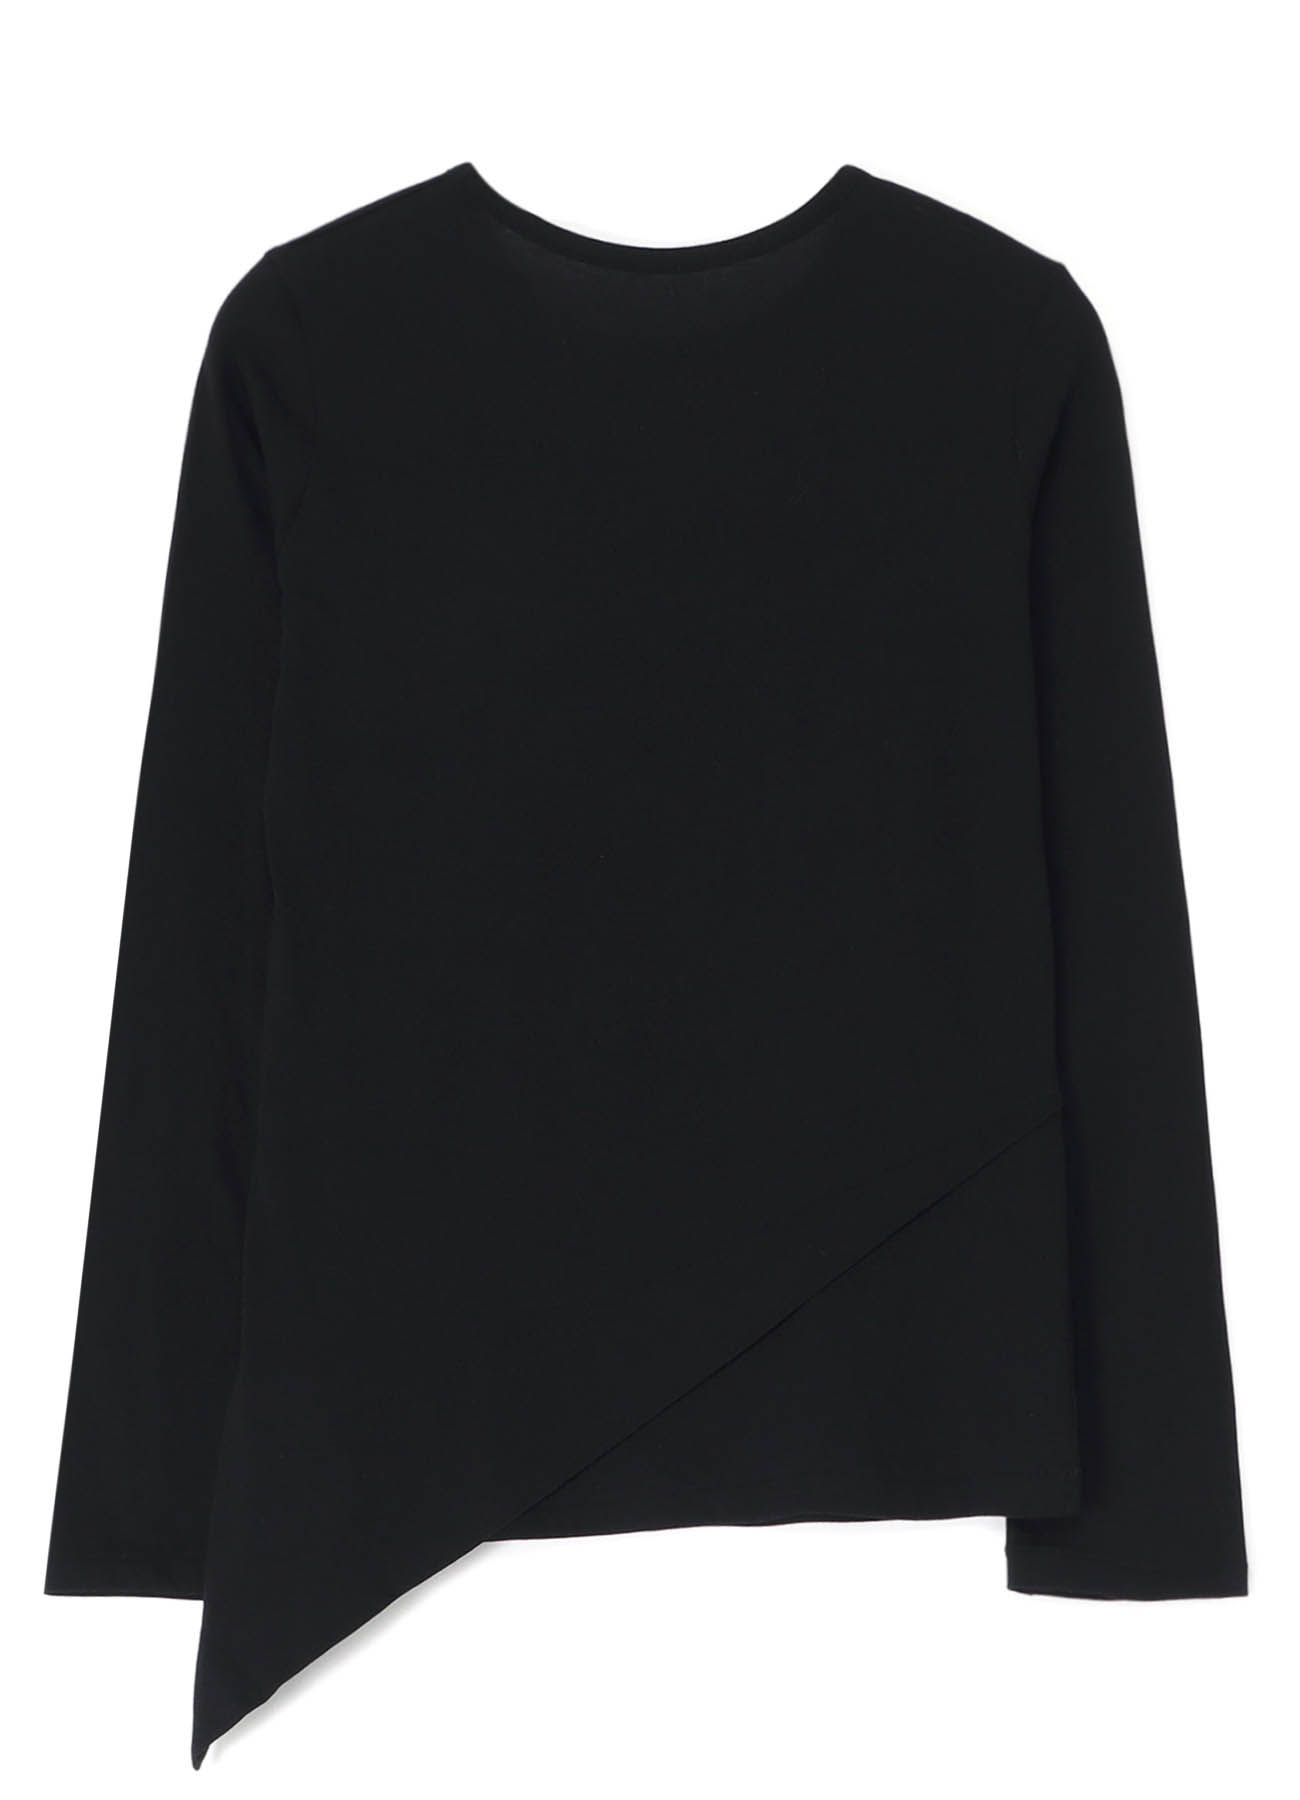 LONG SLEEVE T-SHIRT WITH FOLD OVER DETAILS